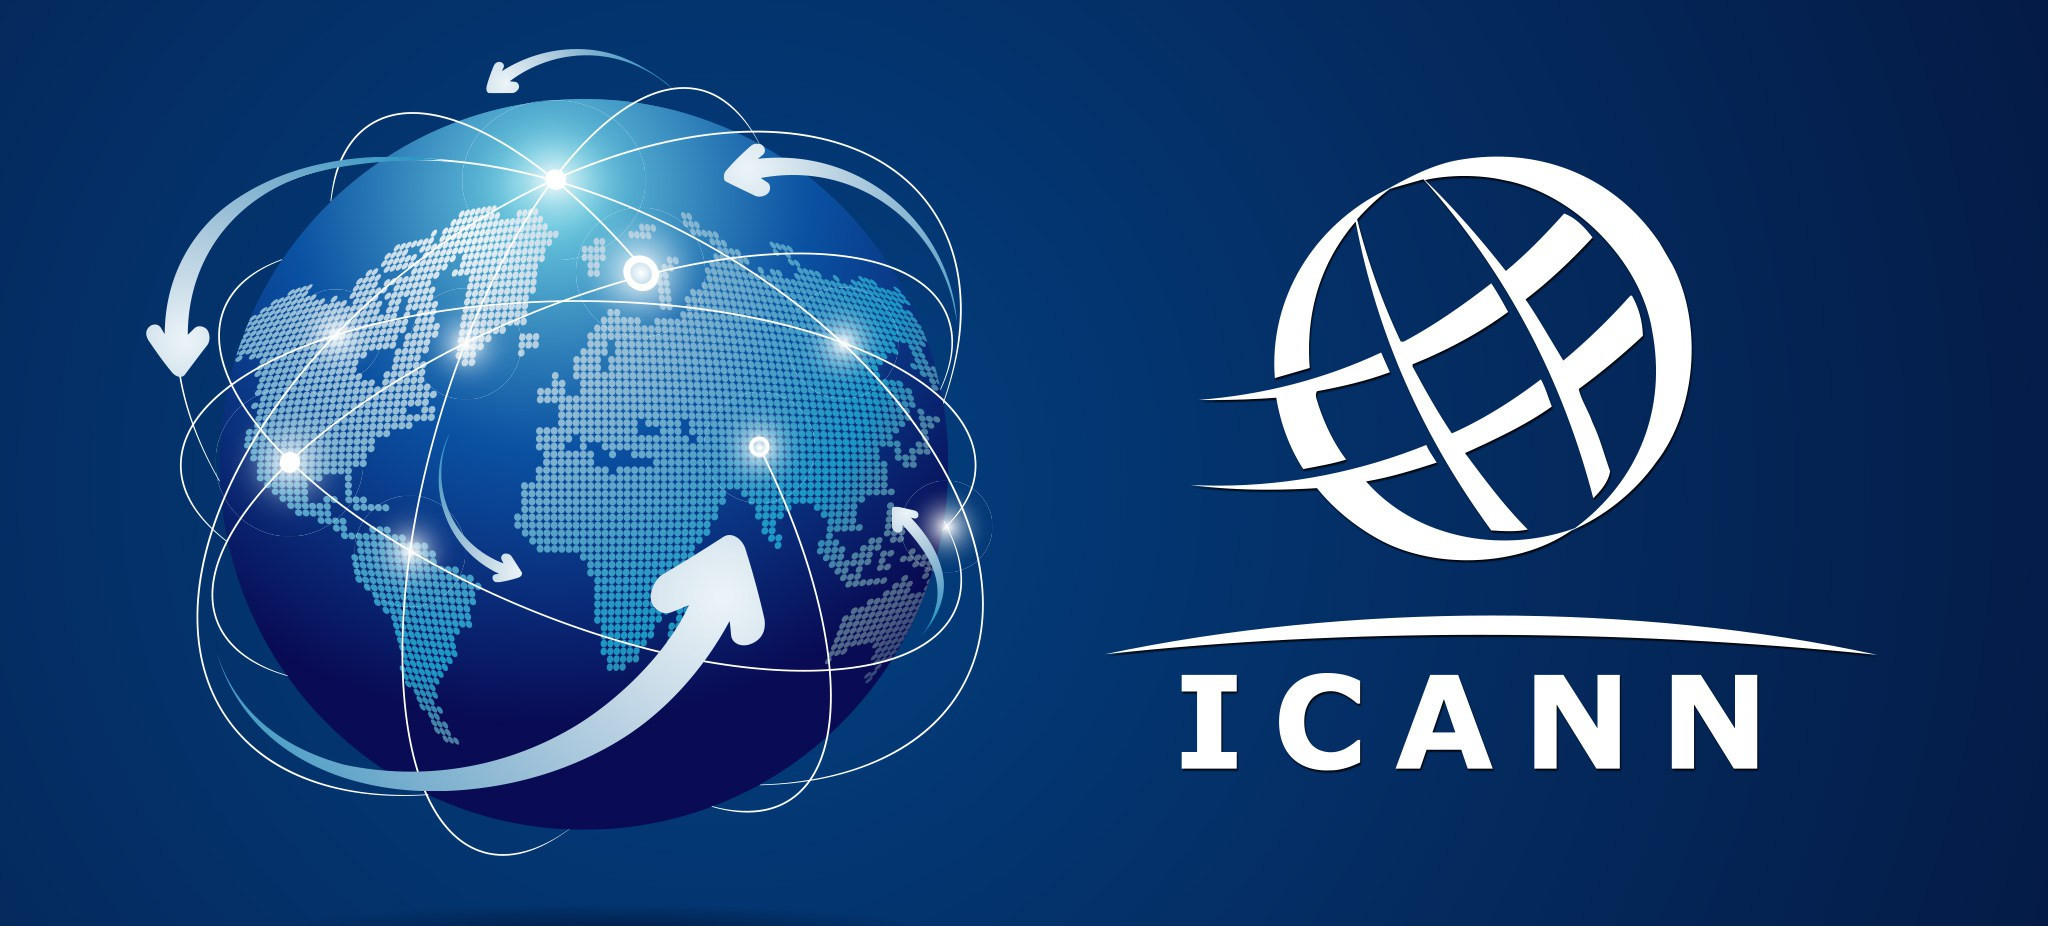 ICANN - the Internet Corporation for Assigned Names and Numbers - has published a report on its website which constitutes formal recognition of acceptance of the 